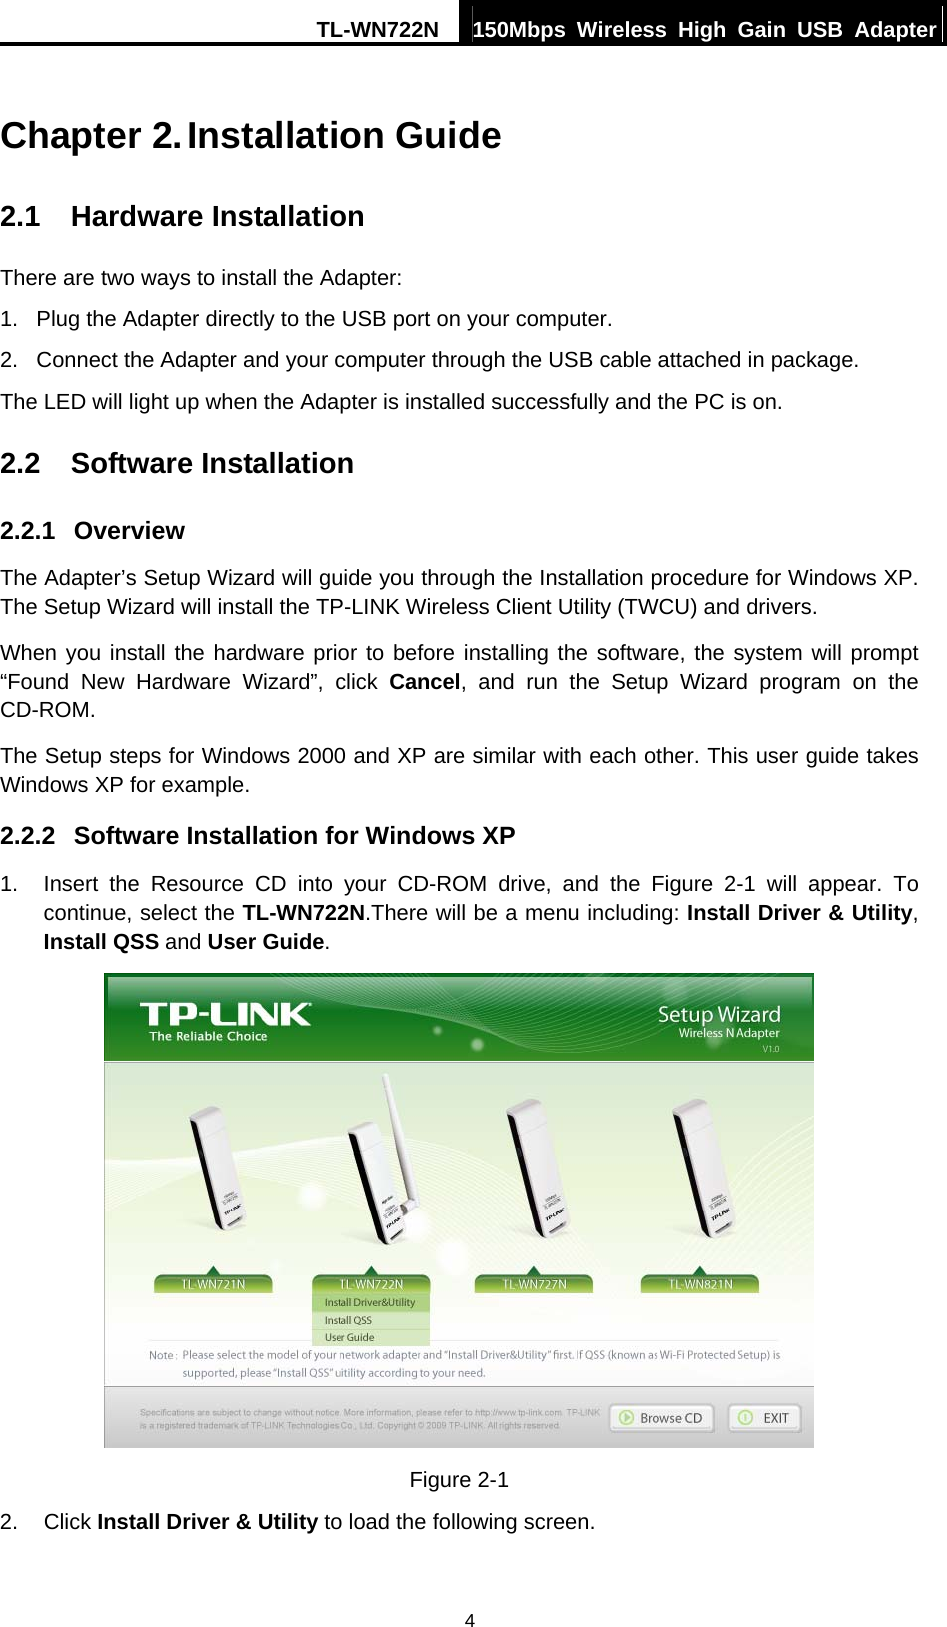 TL-WN722N  150Mbps Wireless High Gain USB Adapter   4Chapter 2. Installation Guide 2.1  Hardware Installation There are two ways to install the Adapter: 1.  Plug the Adapter directly to the USB port on your computer. 2.  Connect the Adapter and your computer through the USB cable attached in package.   The LED will light up when the Adapter is installed successfully and the PC is on. 2.2  Software Installation 2.2.1  Overview The Adapter’s Setup Wizard will guide you through the Installation procedure for Windows XP. The Setup Wizard will install the TP-LINK Wireless Client Utility (TWCU) and drivers. When you install the hardware prior to before installing the software, the system will prompt “Found New Hardware Wizard”, click Cancel, and run the Setup Wizard program on the CD-ROM.  The Setup steps for Windows 2000 and XP are similar with each other. This user guide takes Windows XP for example. 2.2.2  Software Installation for Windows XP 1.  Insert the Resource CD into your CD-ROM drive, and the Figure 2-1 will appear. To continue, select the TL-WN722N.There will be a menu including: Install Driver &amp; Utility, Install QSS and User Guide.  Figure 2-1 2. Click Install Driver &amp; Utility to load the following screen. 